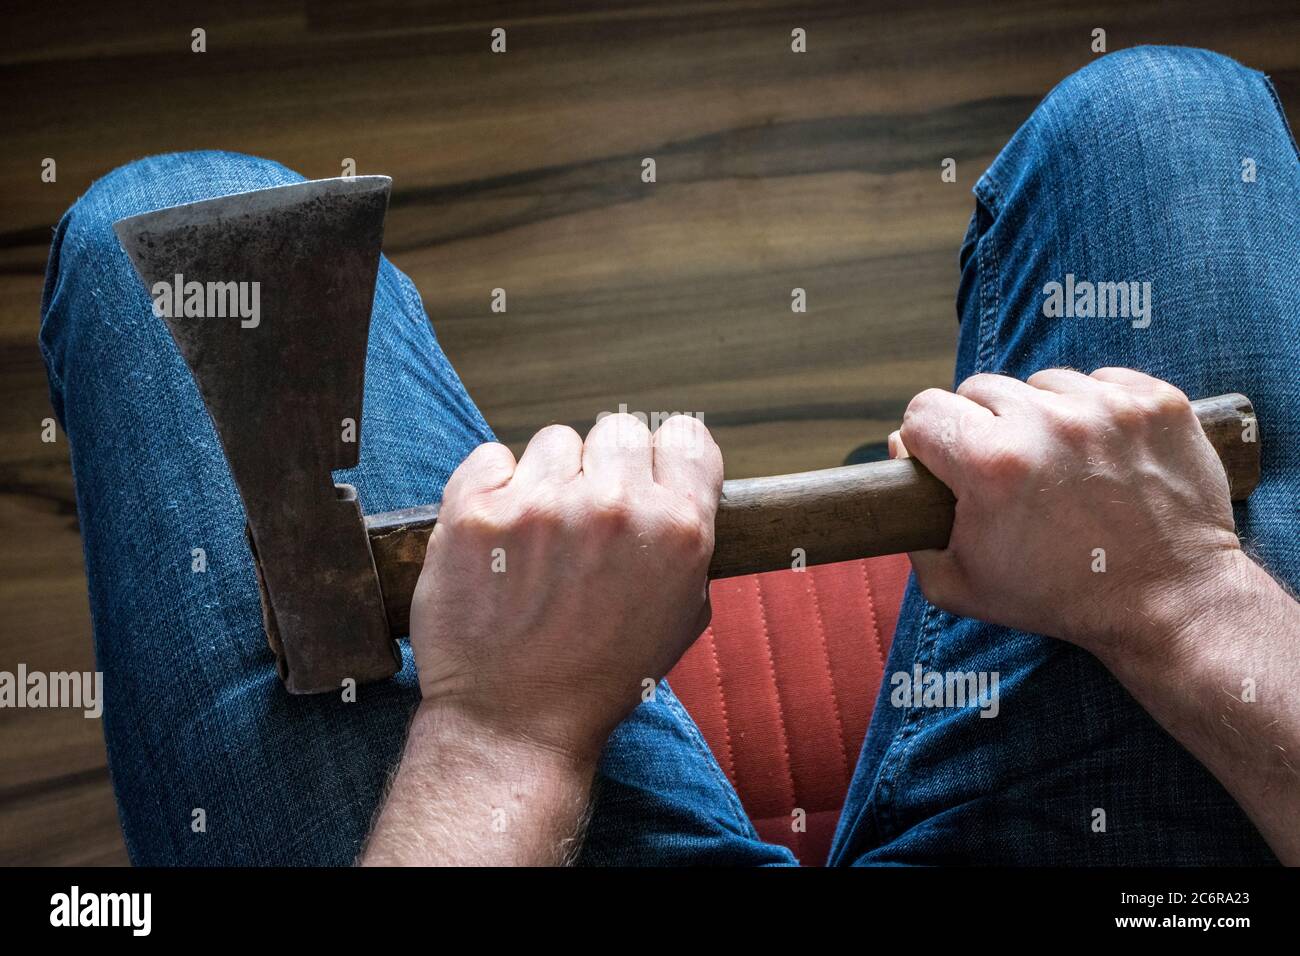 A man squeezing an ax in his knees. The concept, Domestic violence, social problems, crime Stock Photo